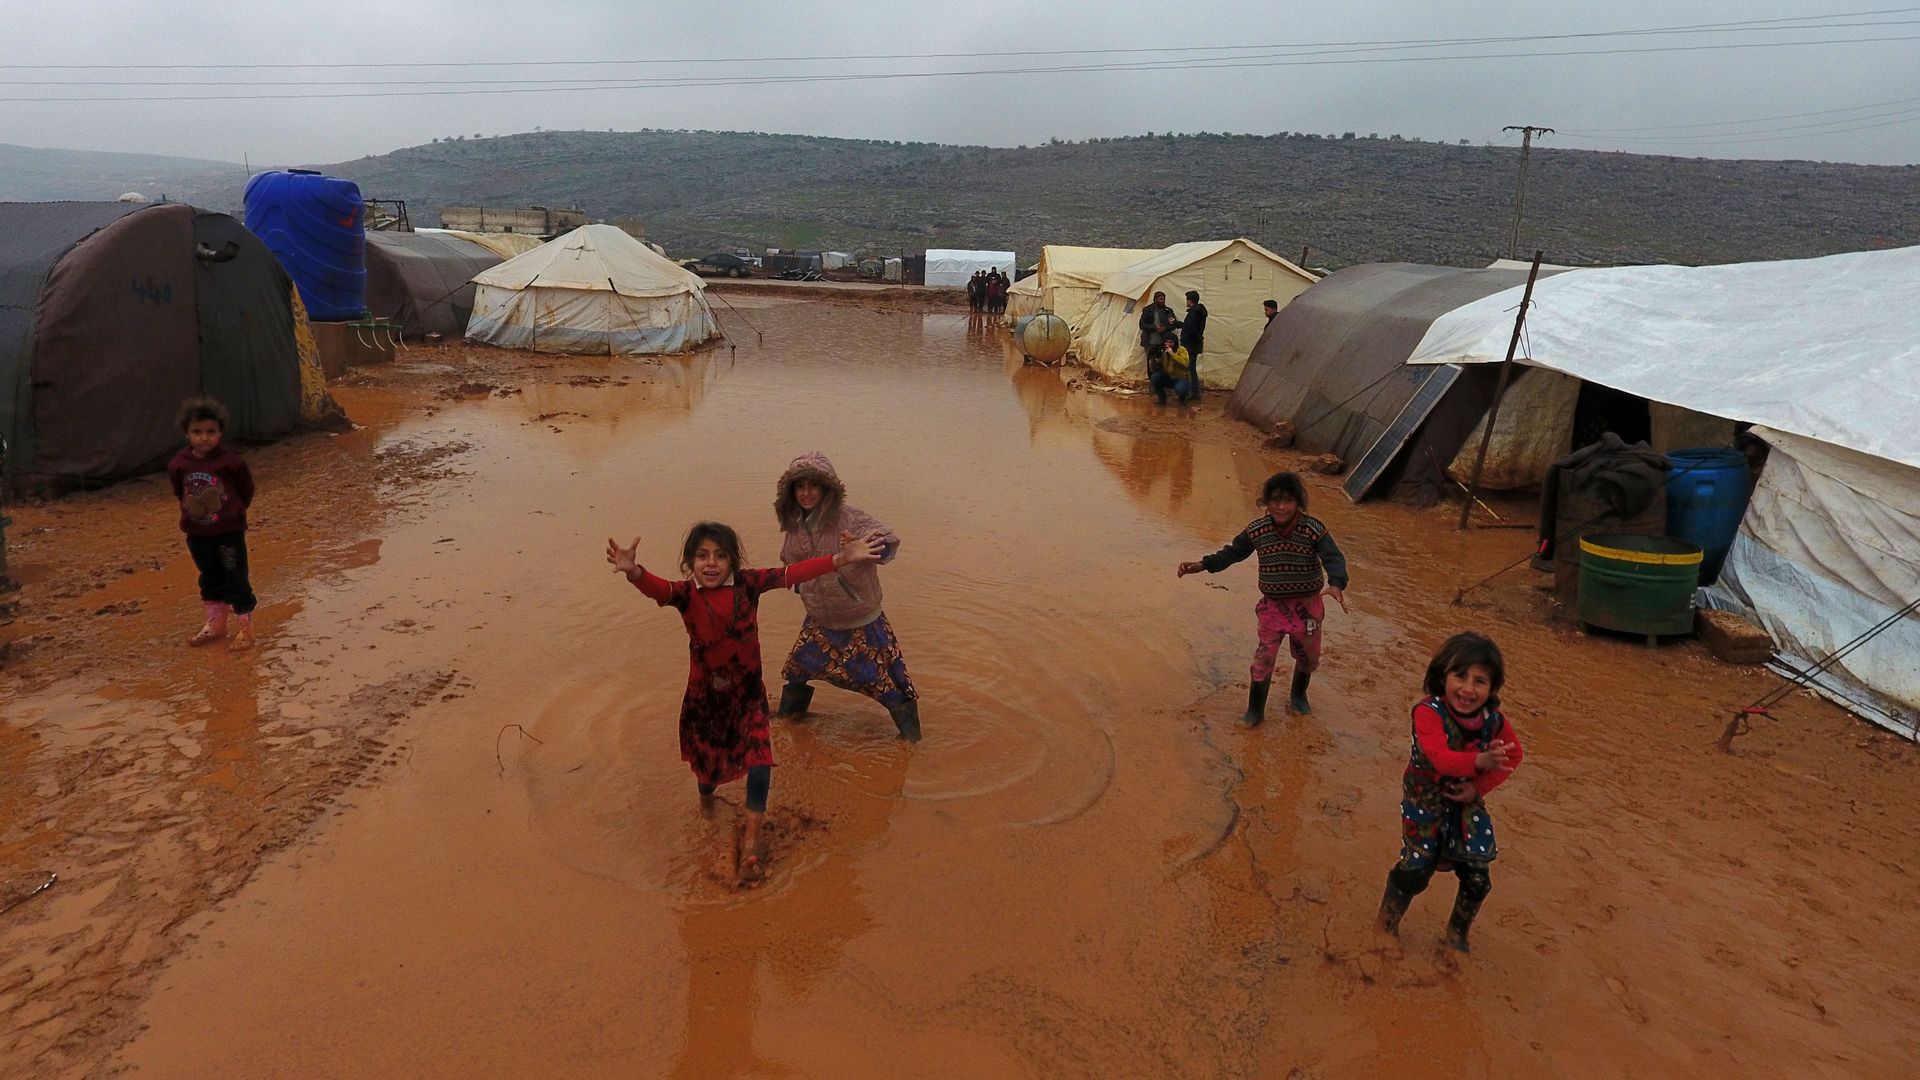 children playing in between tents on wet ground of refugee camp